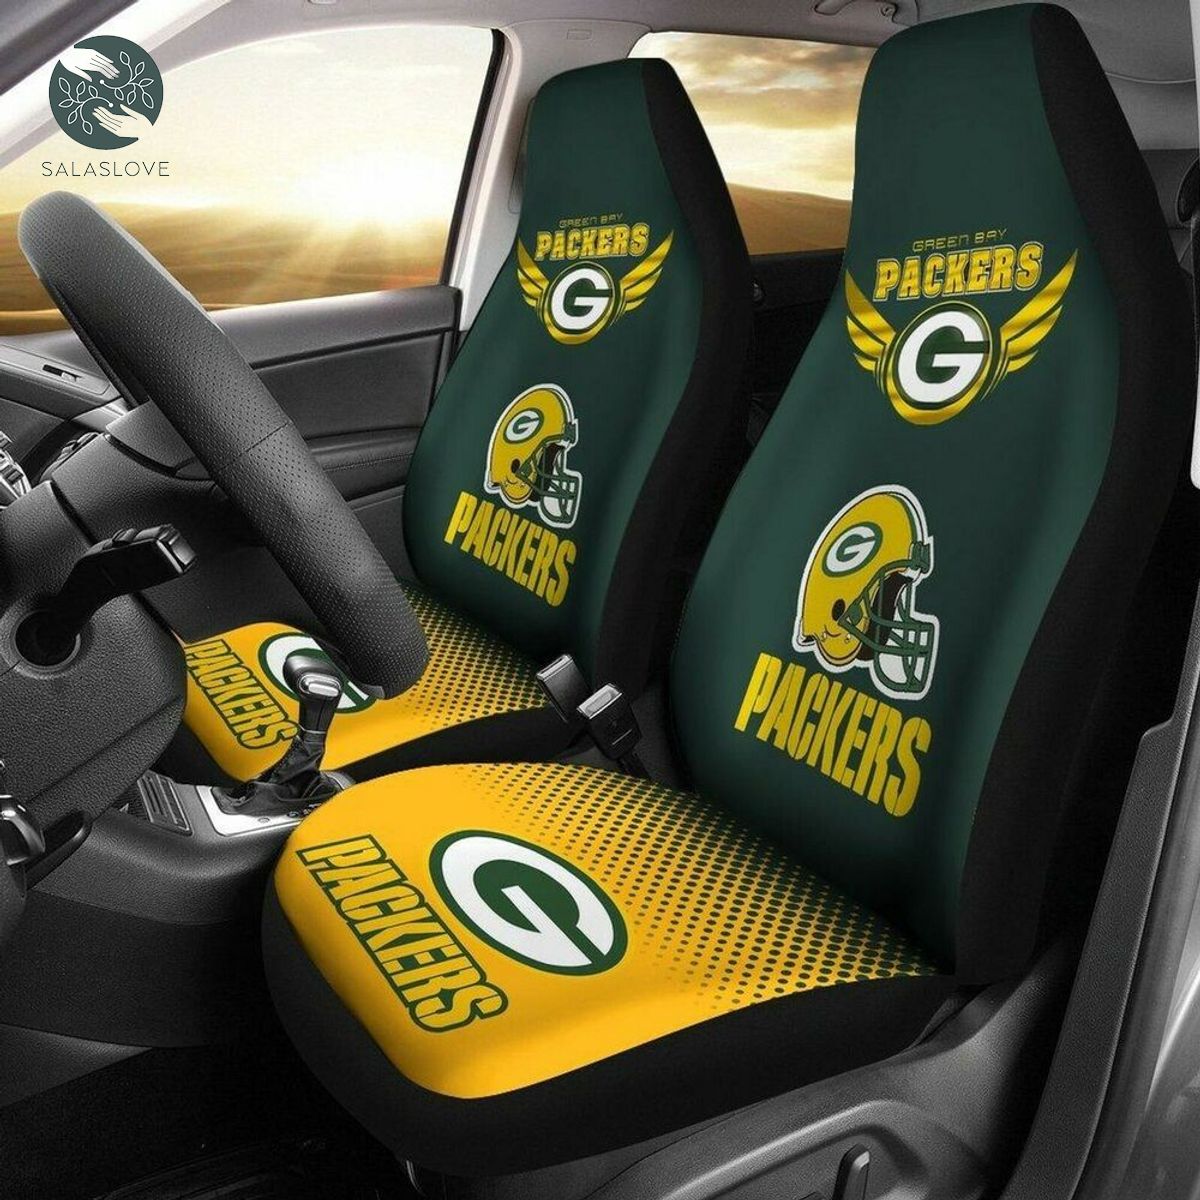 Green Bay Packers Football Team Car Seat Cover

